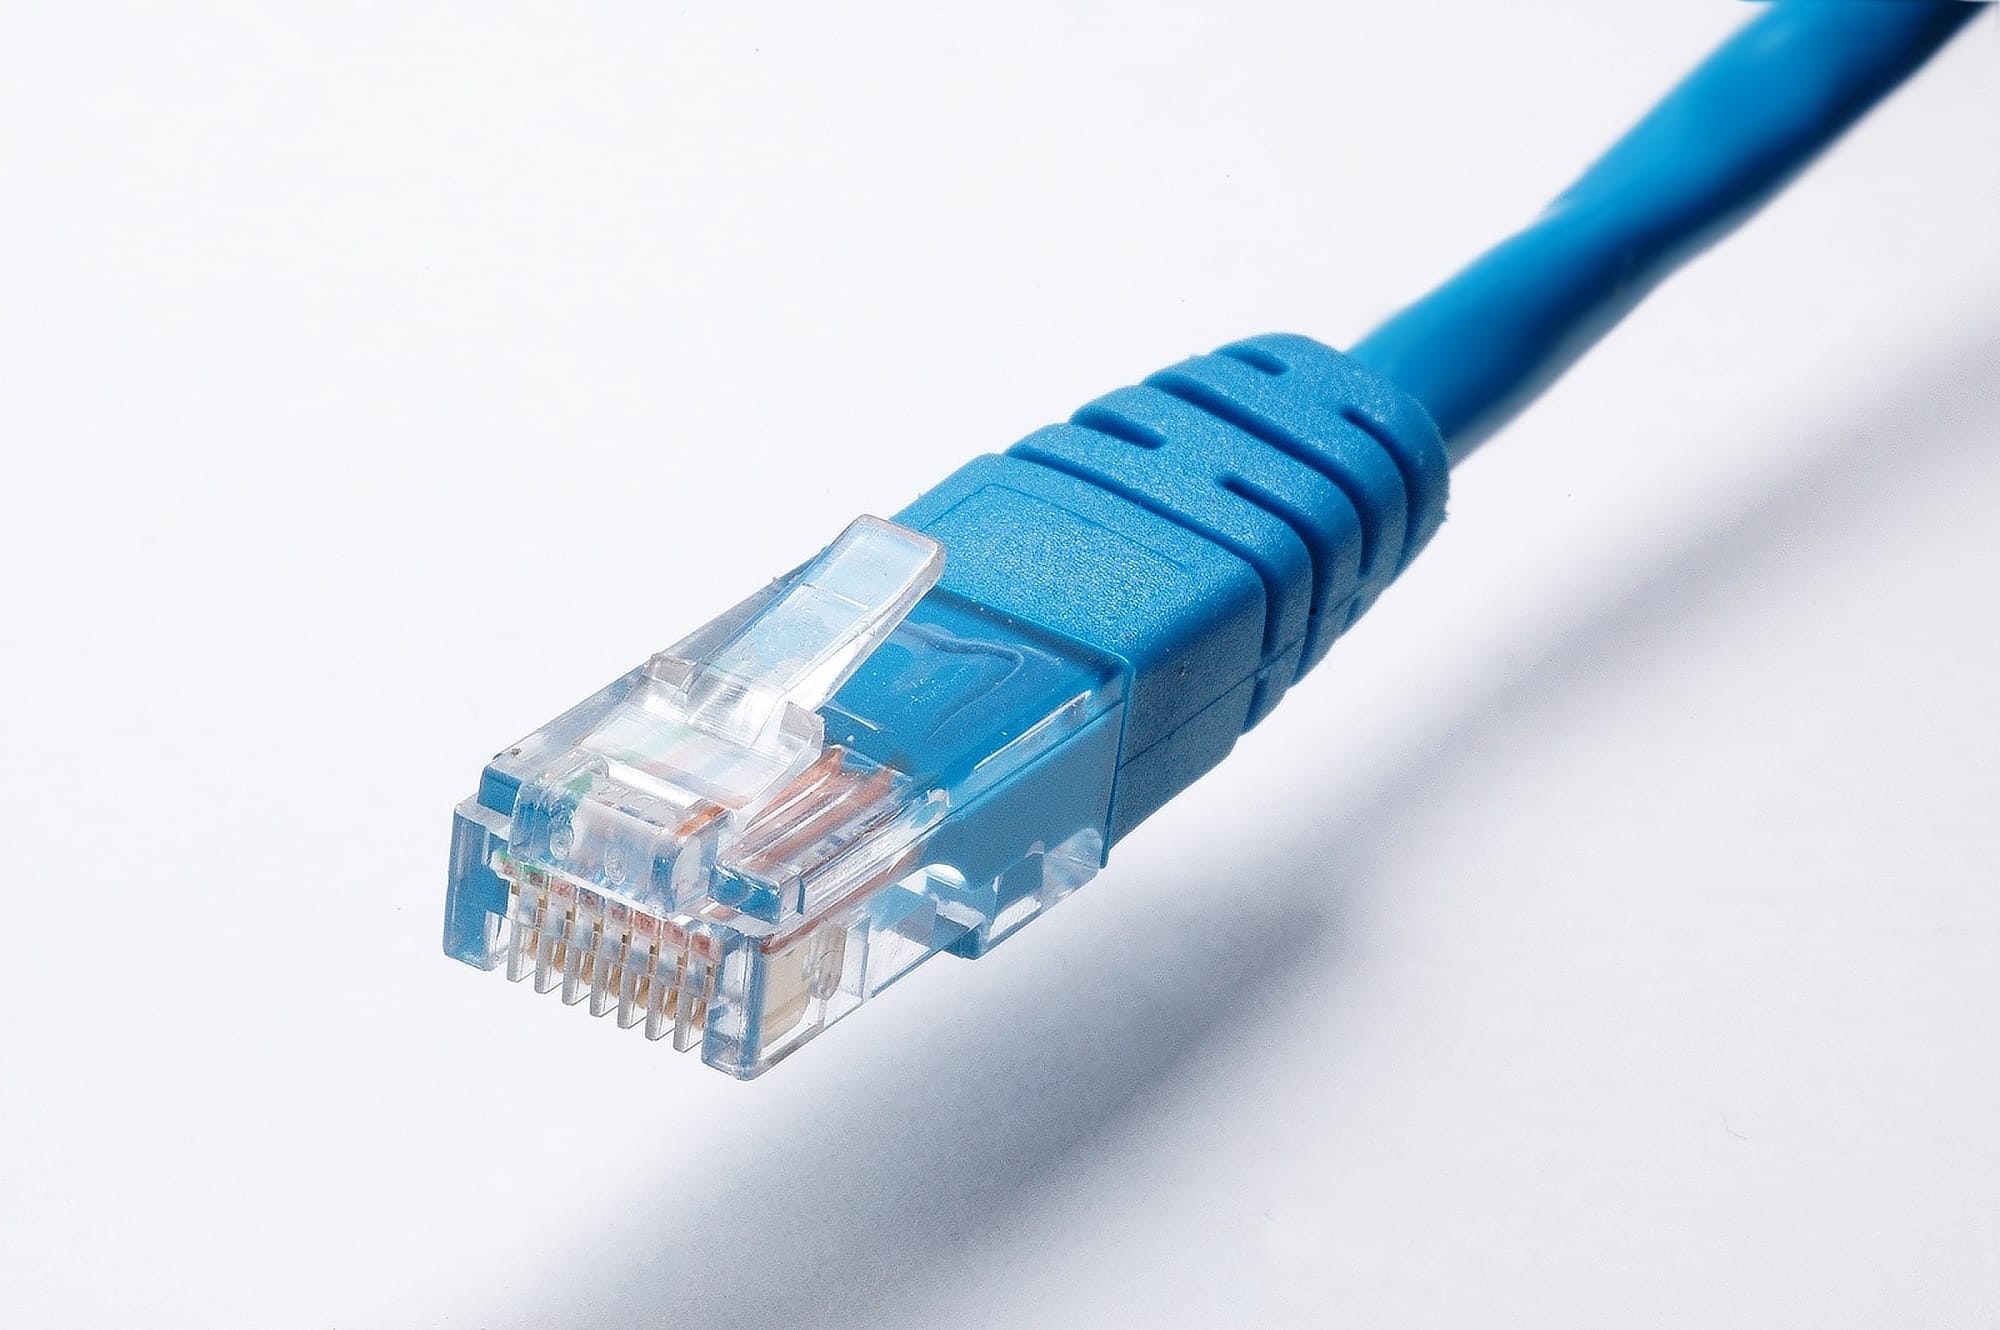 Ethernet Cable Market is Projected to Reach $29.23 Billion by 2030, at a CAGR of 11.3%